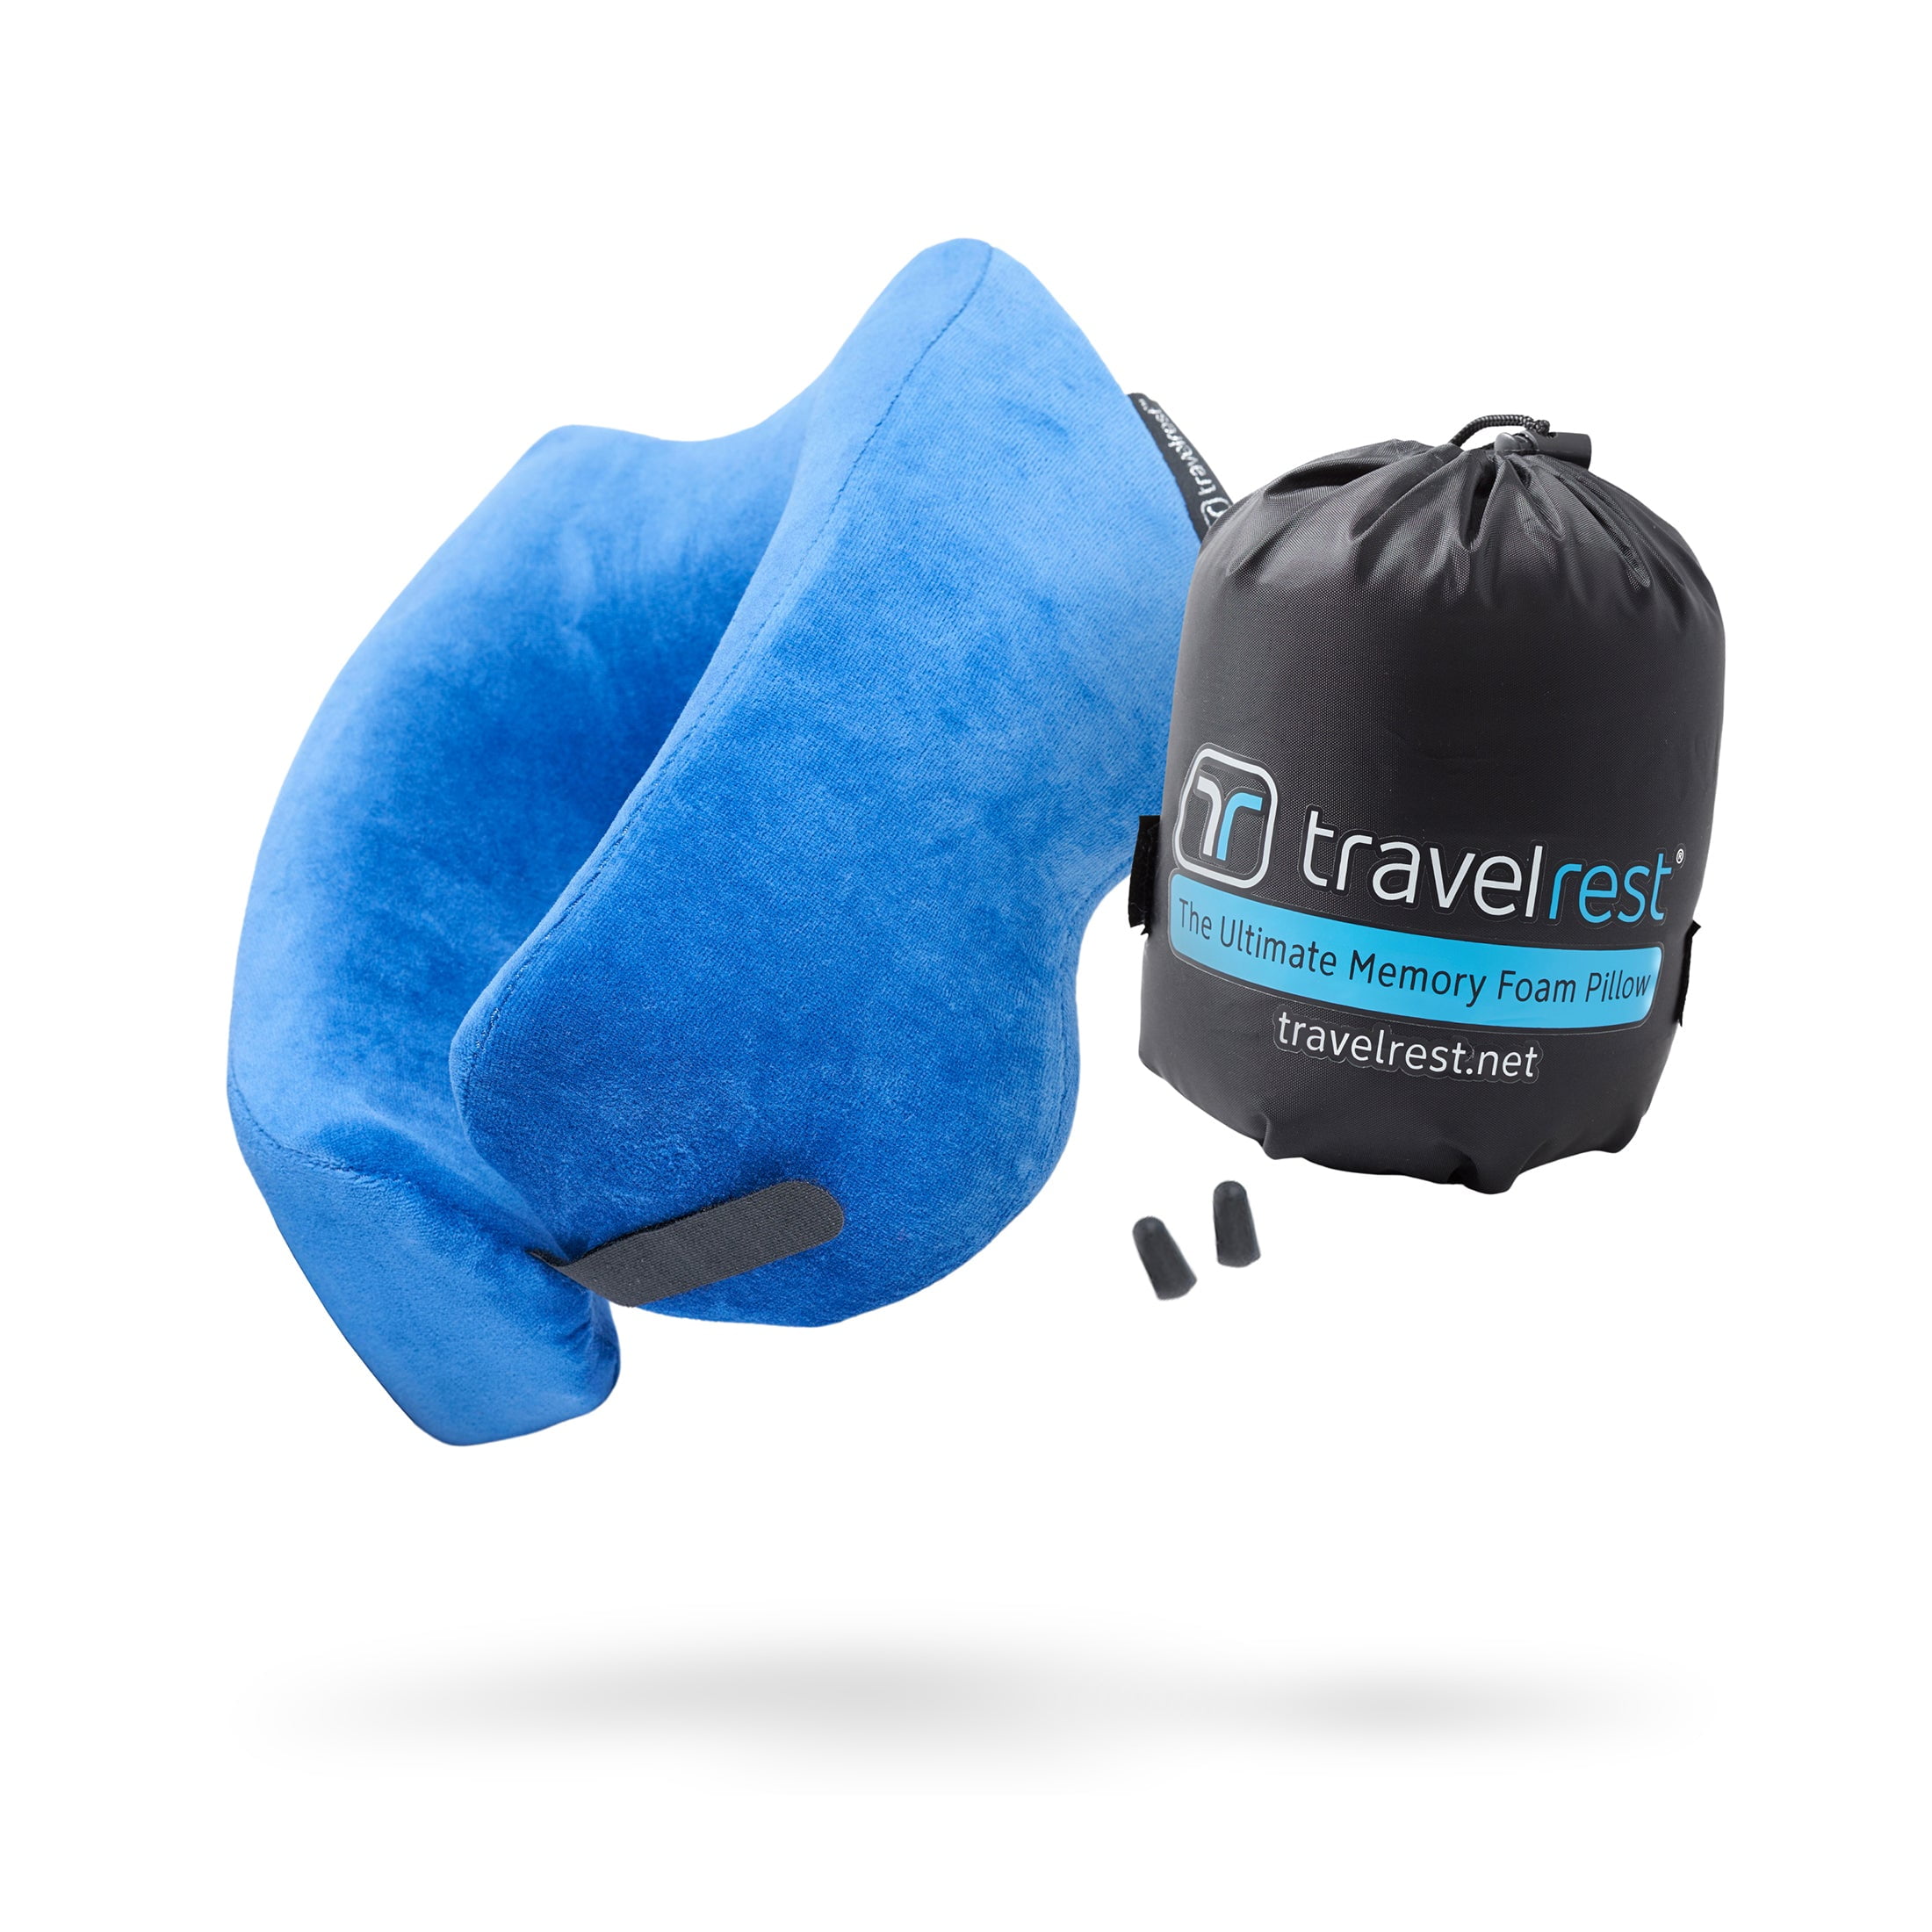 Travelrest Nest Patented Ultimate Memory Foam Travel Pillow/Neck Pillow Voted Best Travel Pillow for 2022 by Wirecutter - image 1 of 11